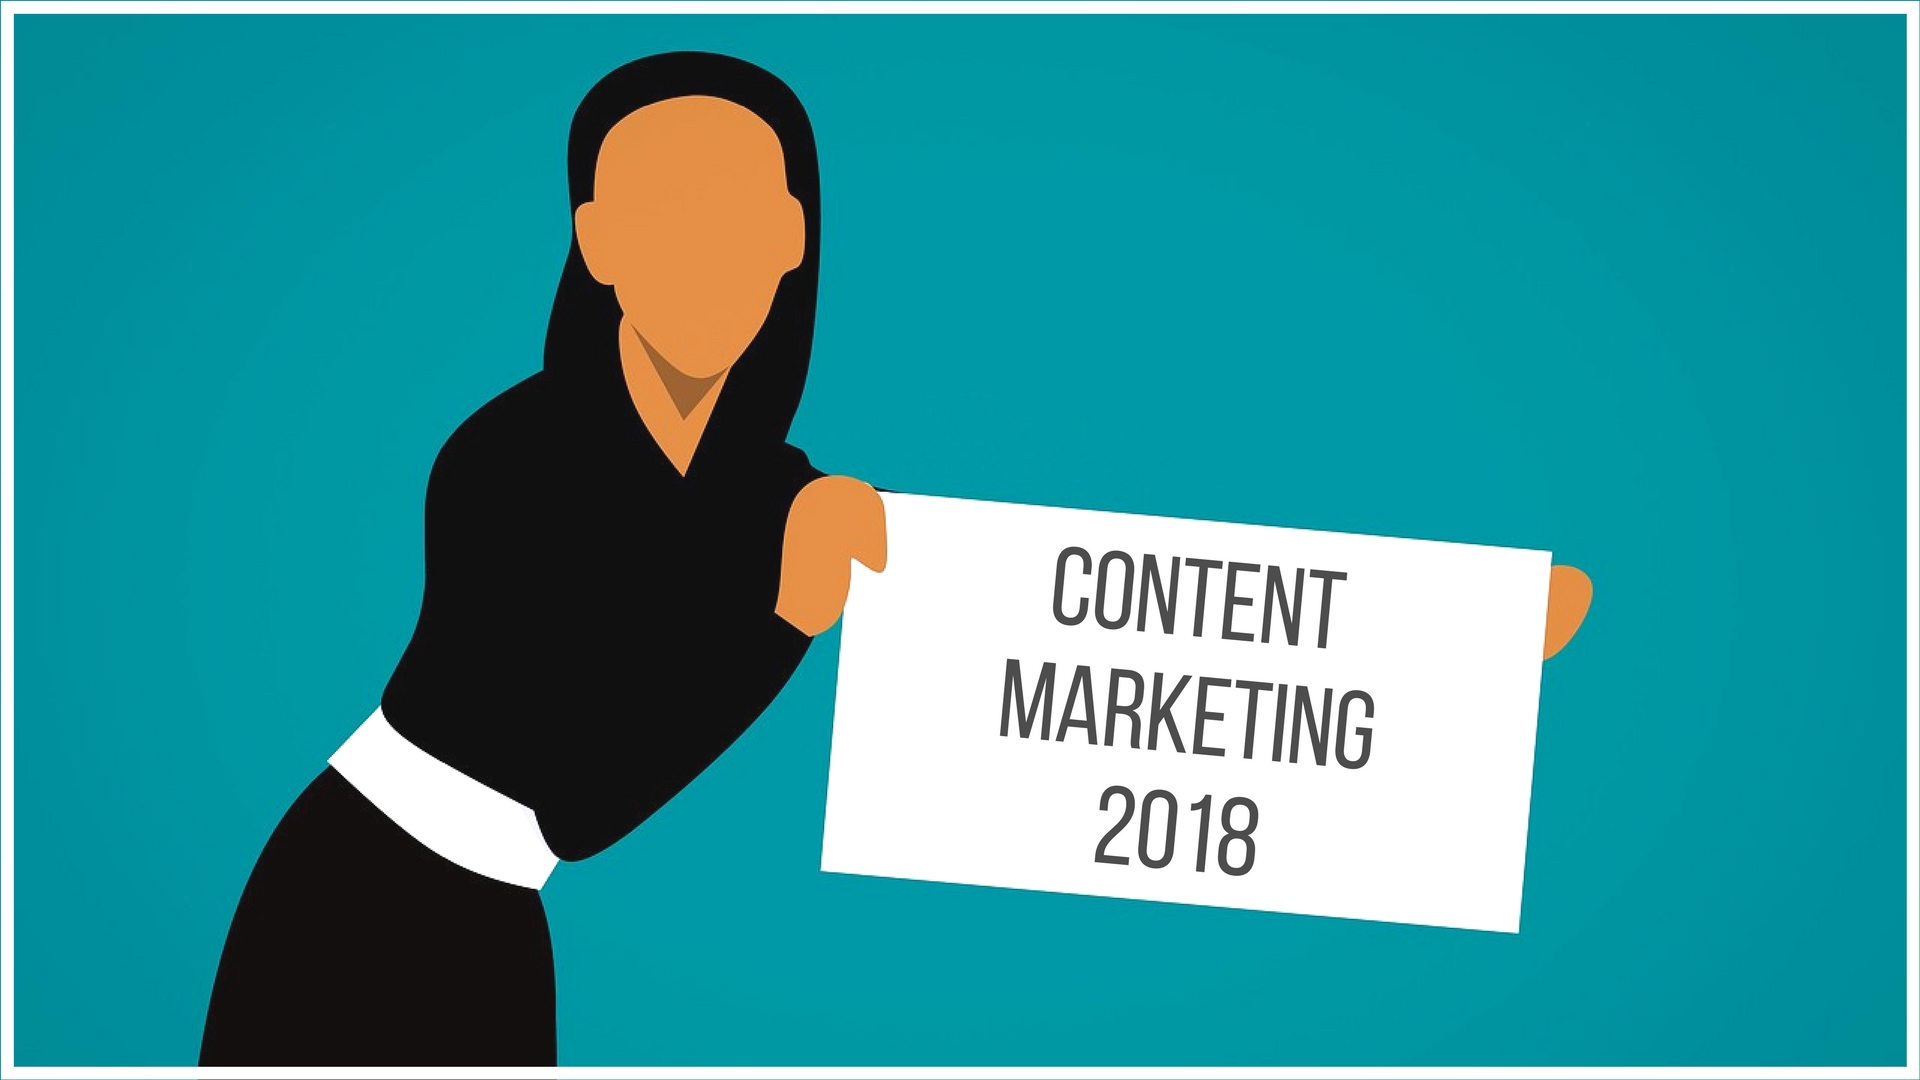 Content Marketing 2018: 8 Trends to Watch Out For